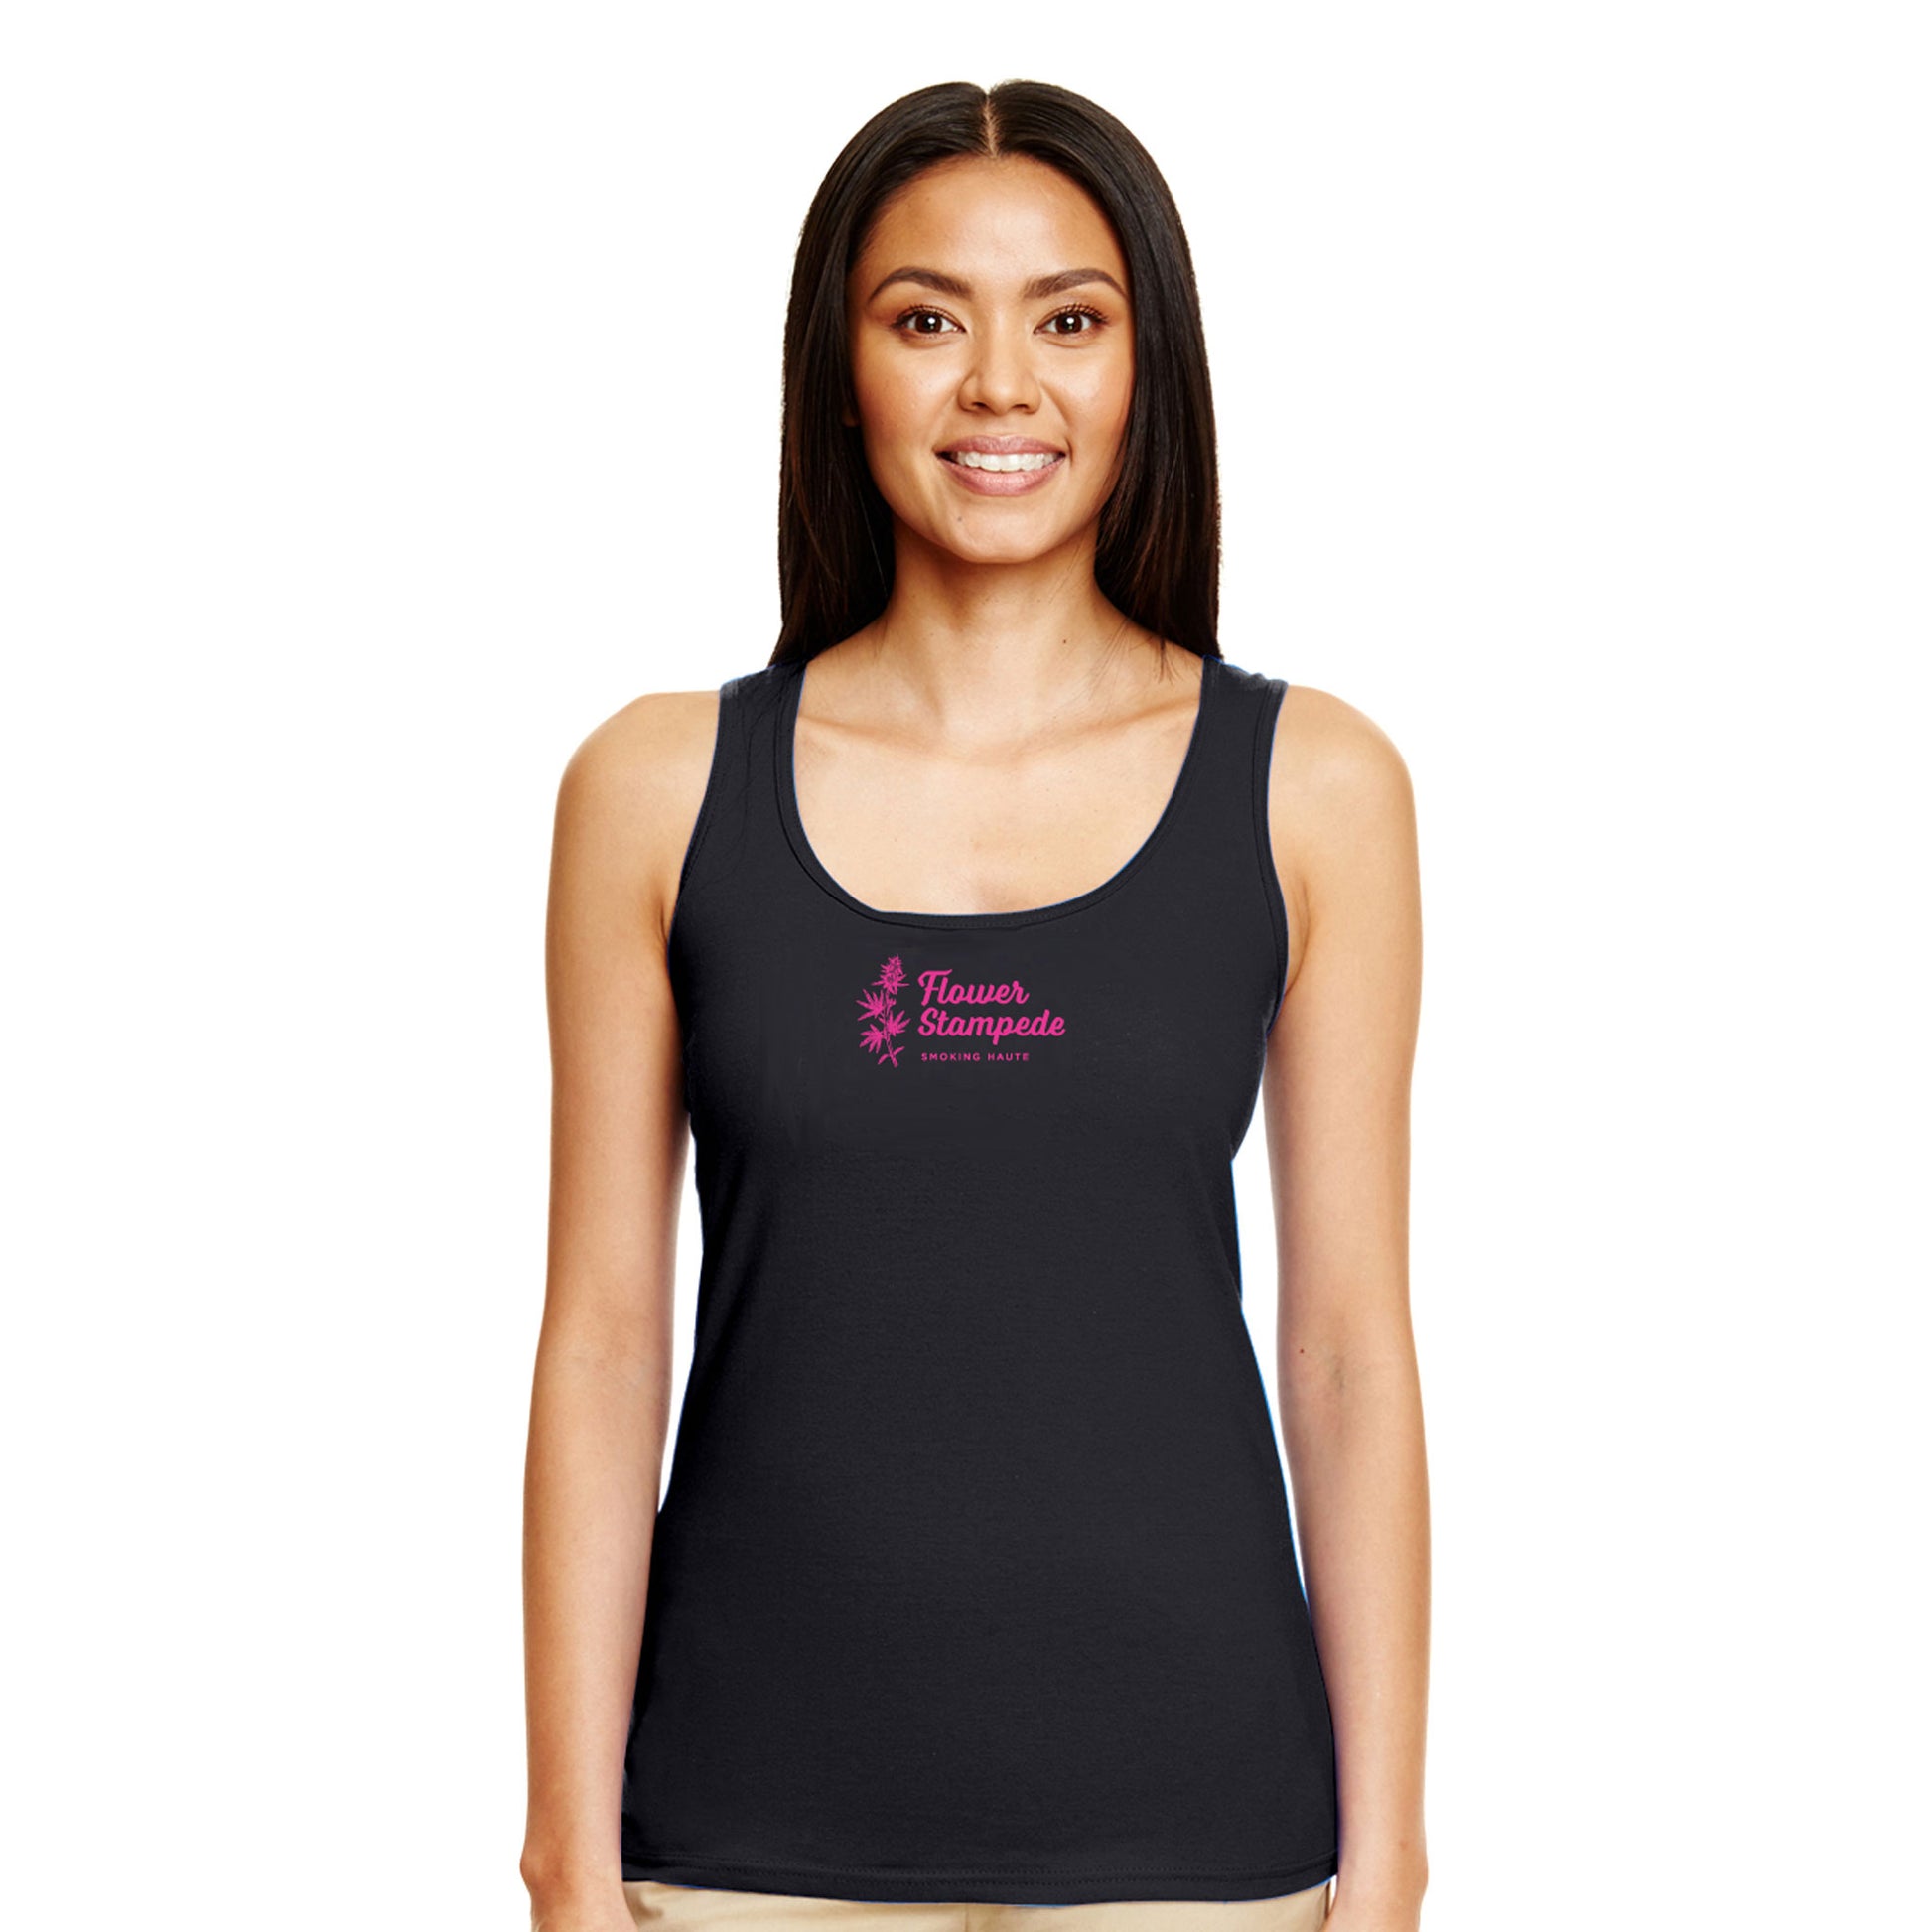 Flower Stampede Racerback Tank has a flattering semi-fitted contoured silhouette